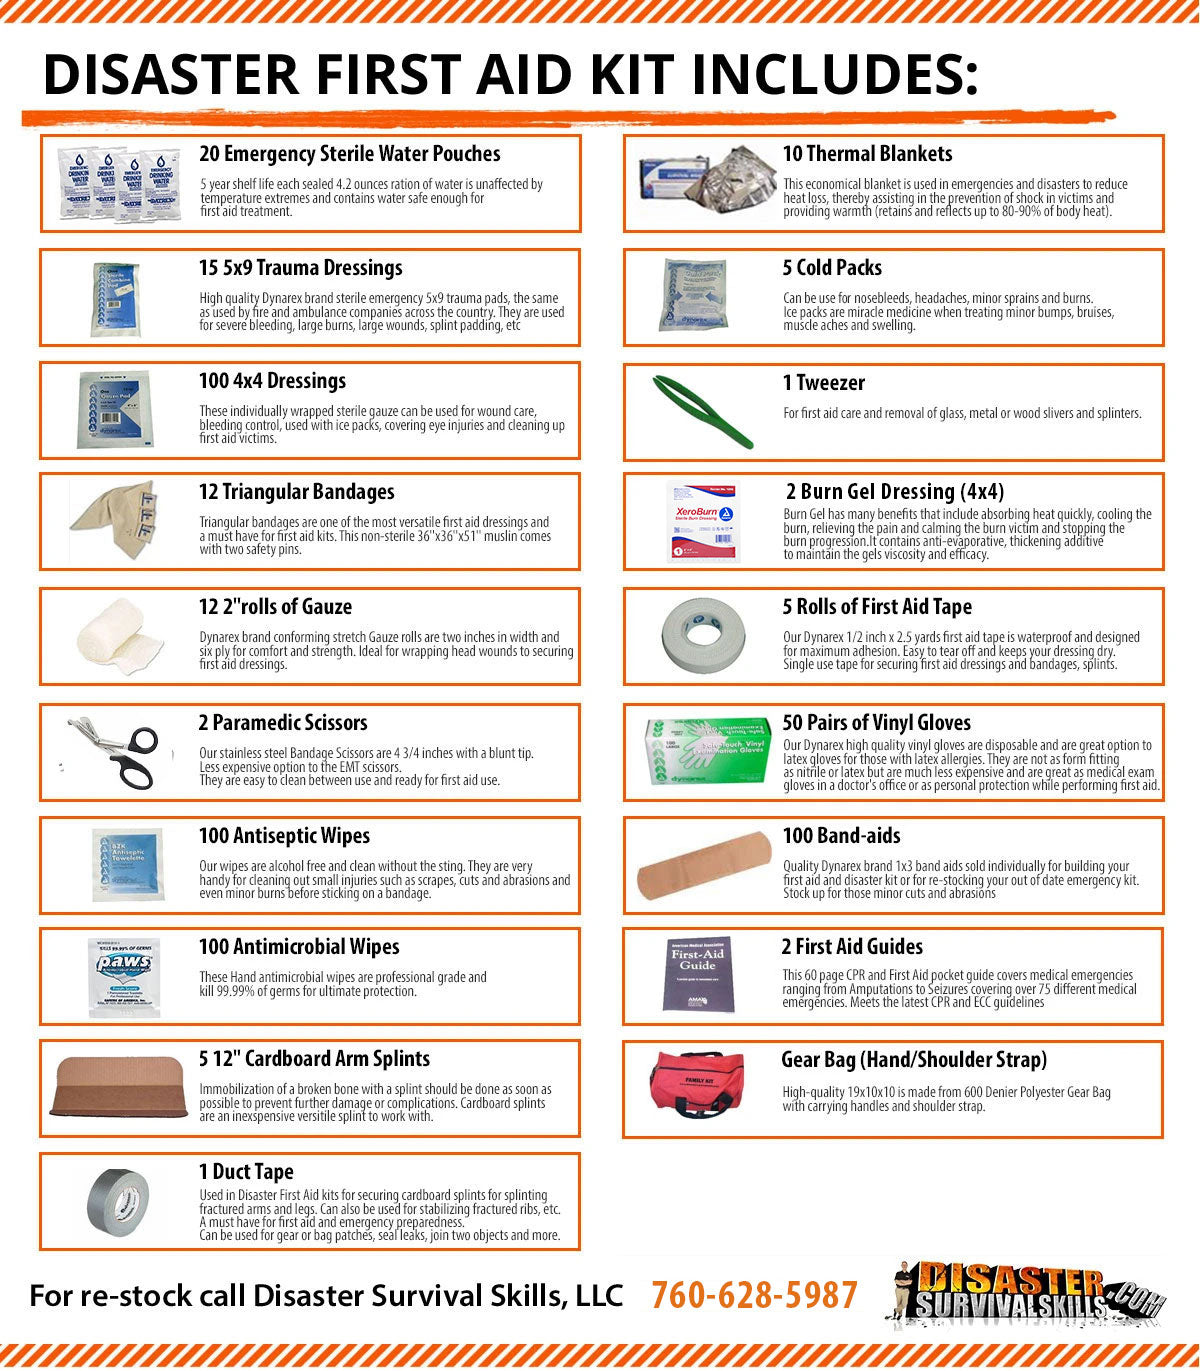 First Aid Kit Items And Their Uses